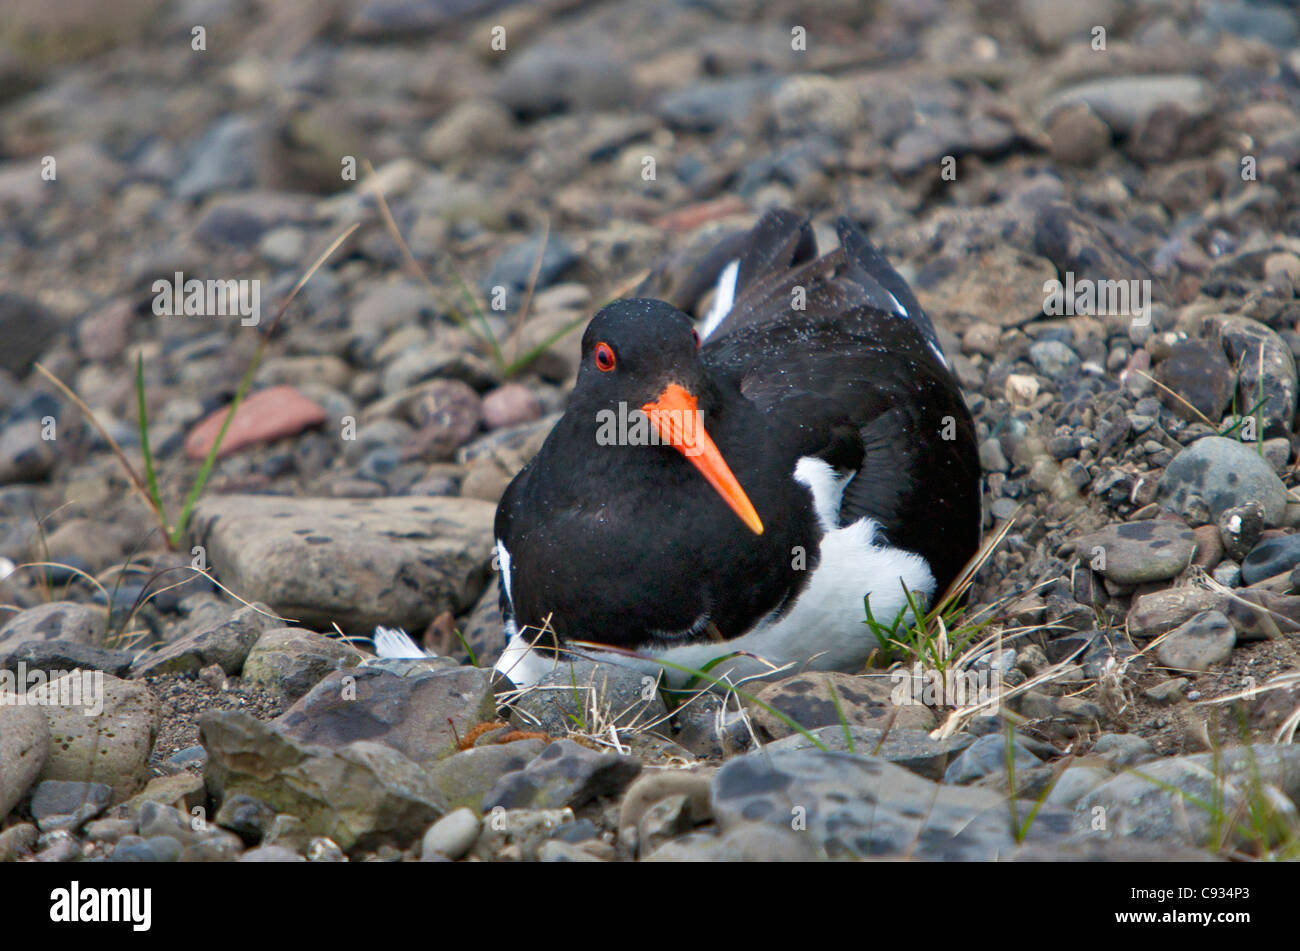 An oystercatcher sitting on eggs.  These birds are common waders in all coastal regions of Iceland. Stock Photo